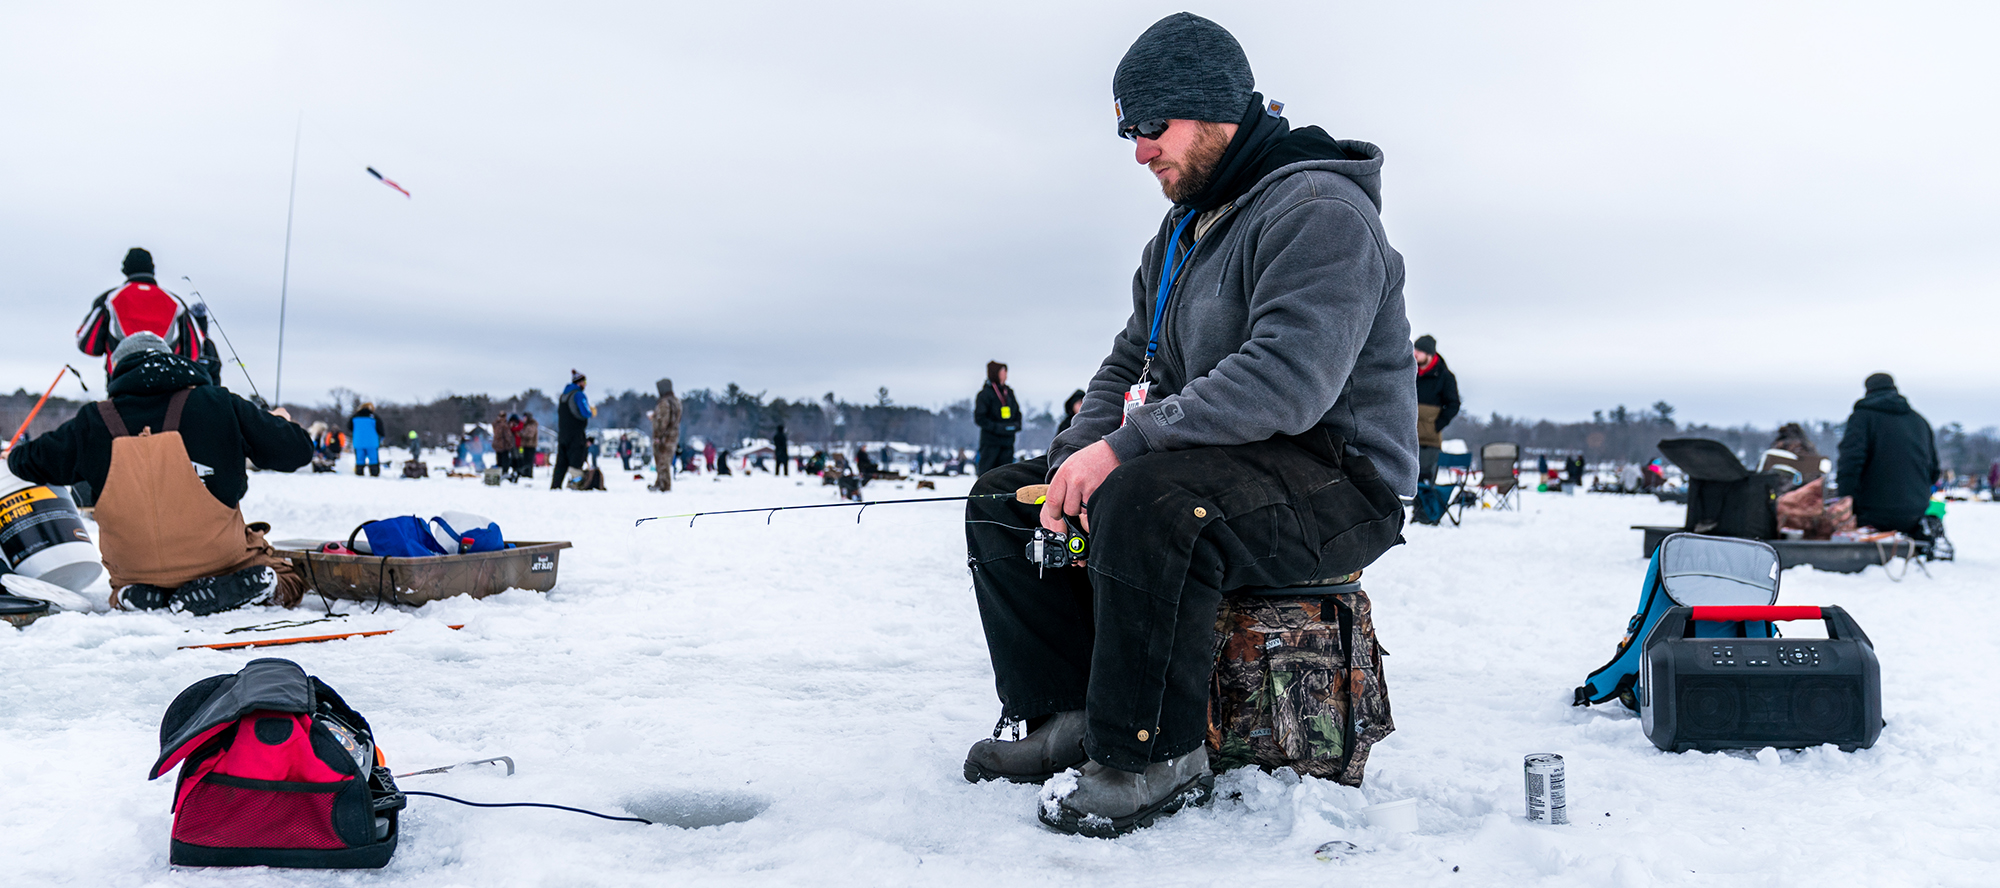 Man sitting watching ice-fishing hole on a snow-covered lake, many people in background.